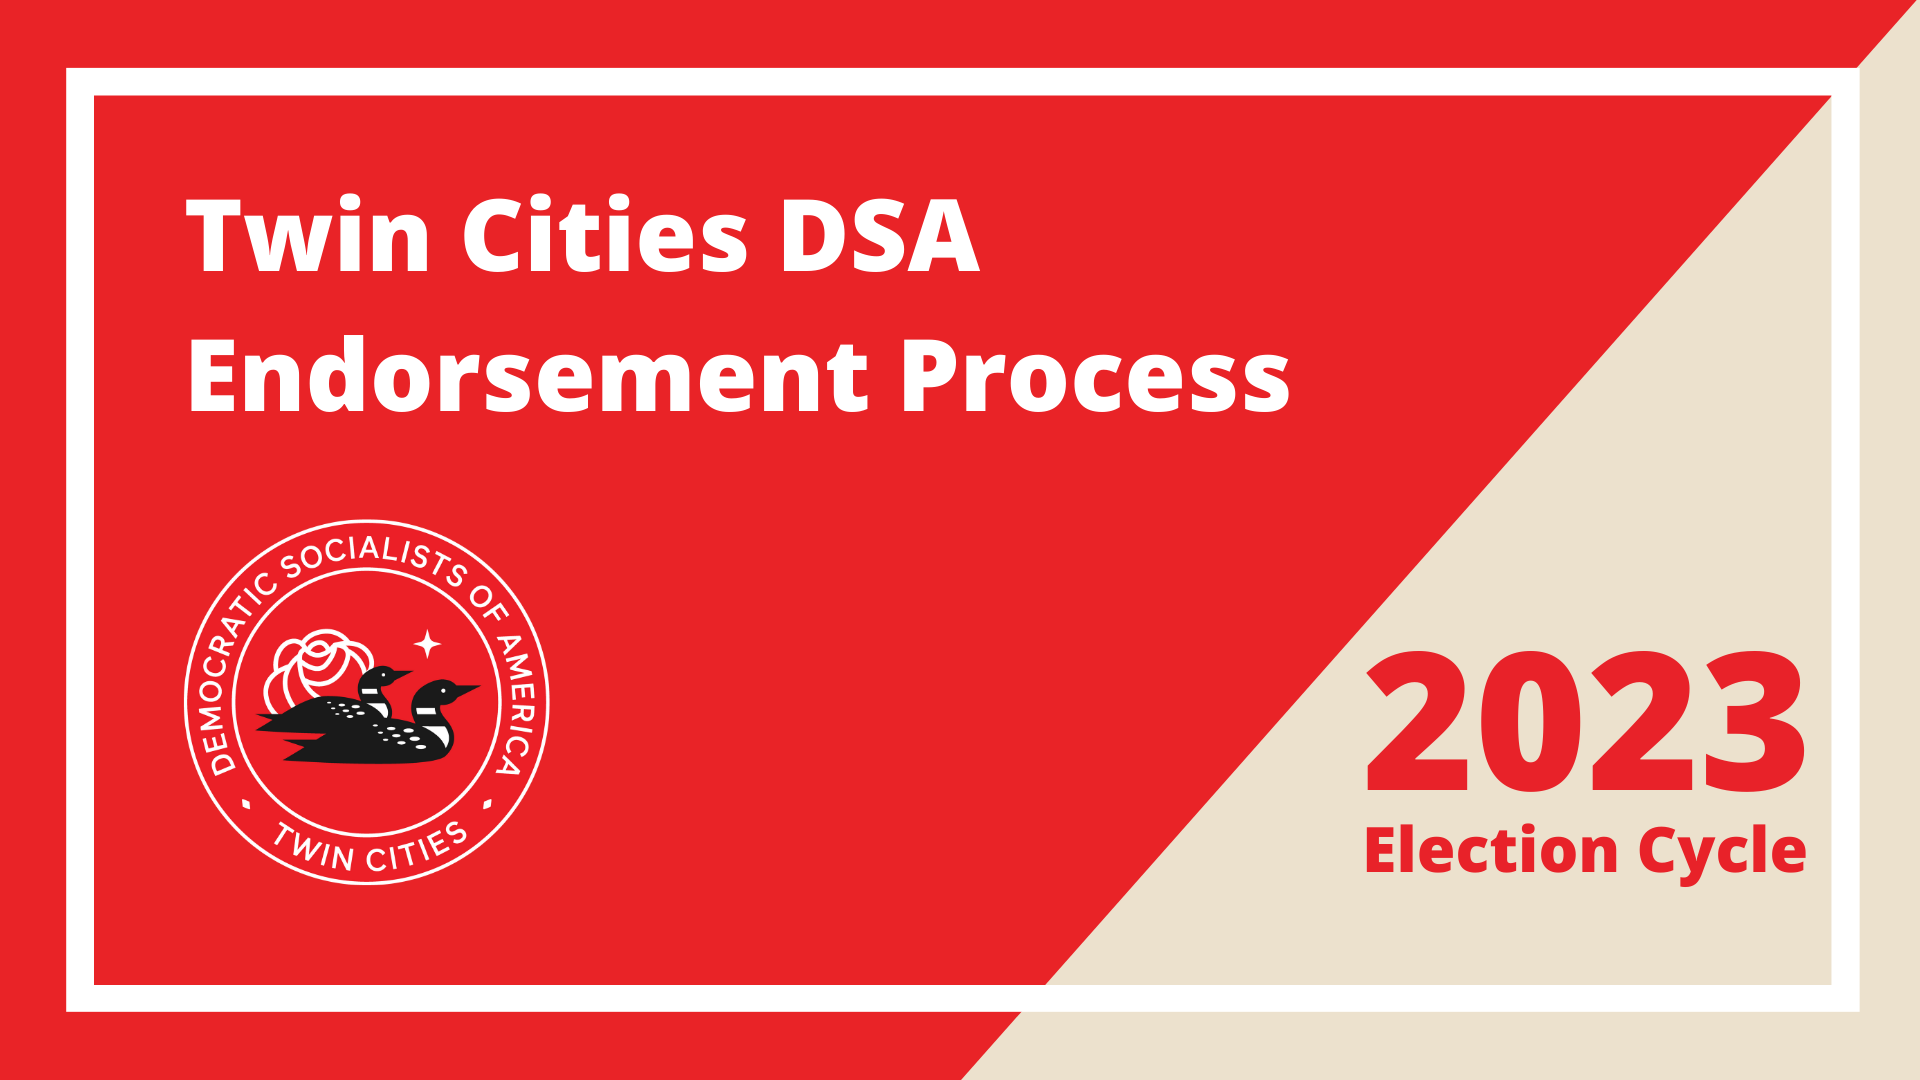 A mostly-red box with the Twin Cities DSA logo that reads: "Twin Cities DSA Endorsement Process", "2023 Election Cycle".